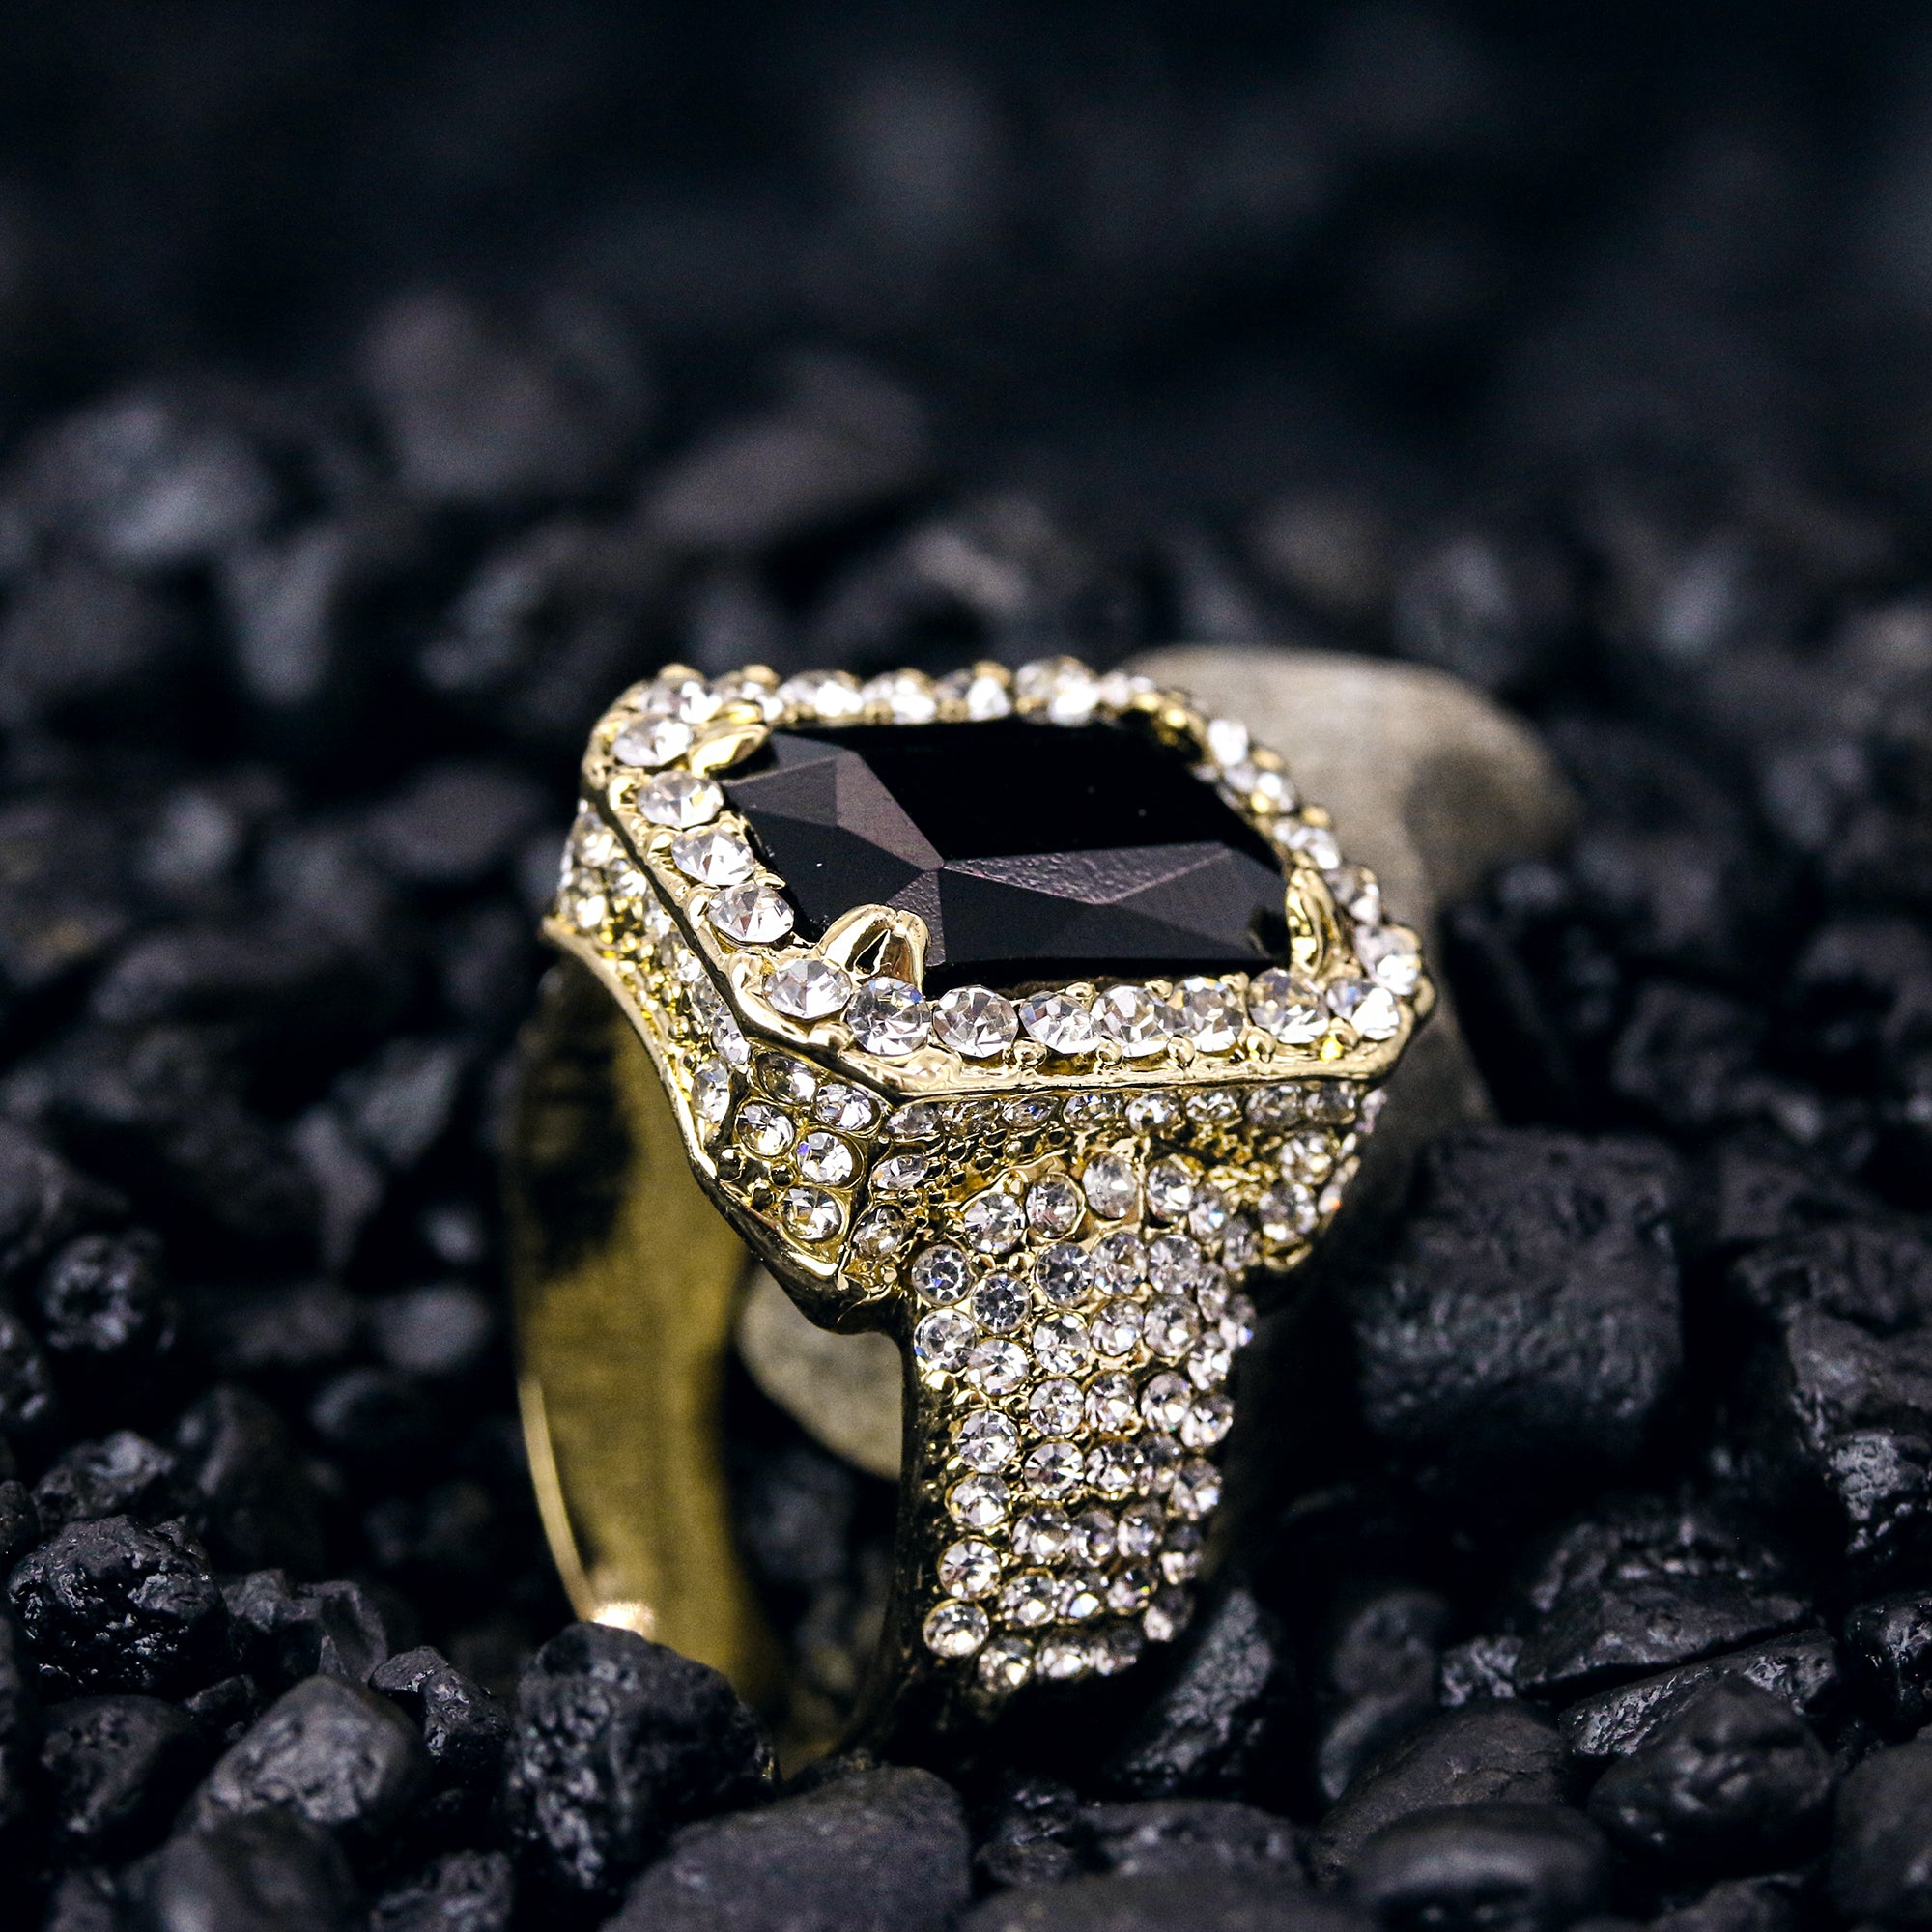 Mens Pyramid Pinky Ring Iced Cubic-Zirconia Pimp 14k Gold Plated Hip Hop